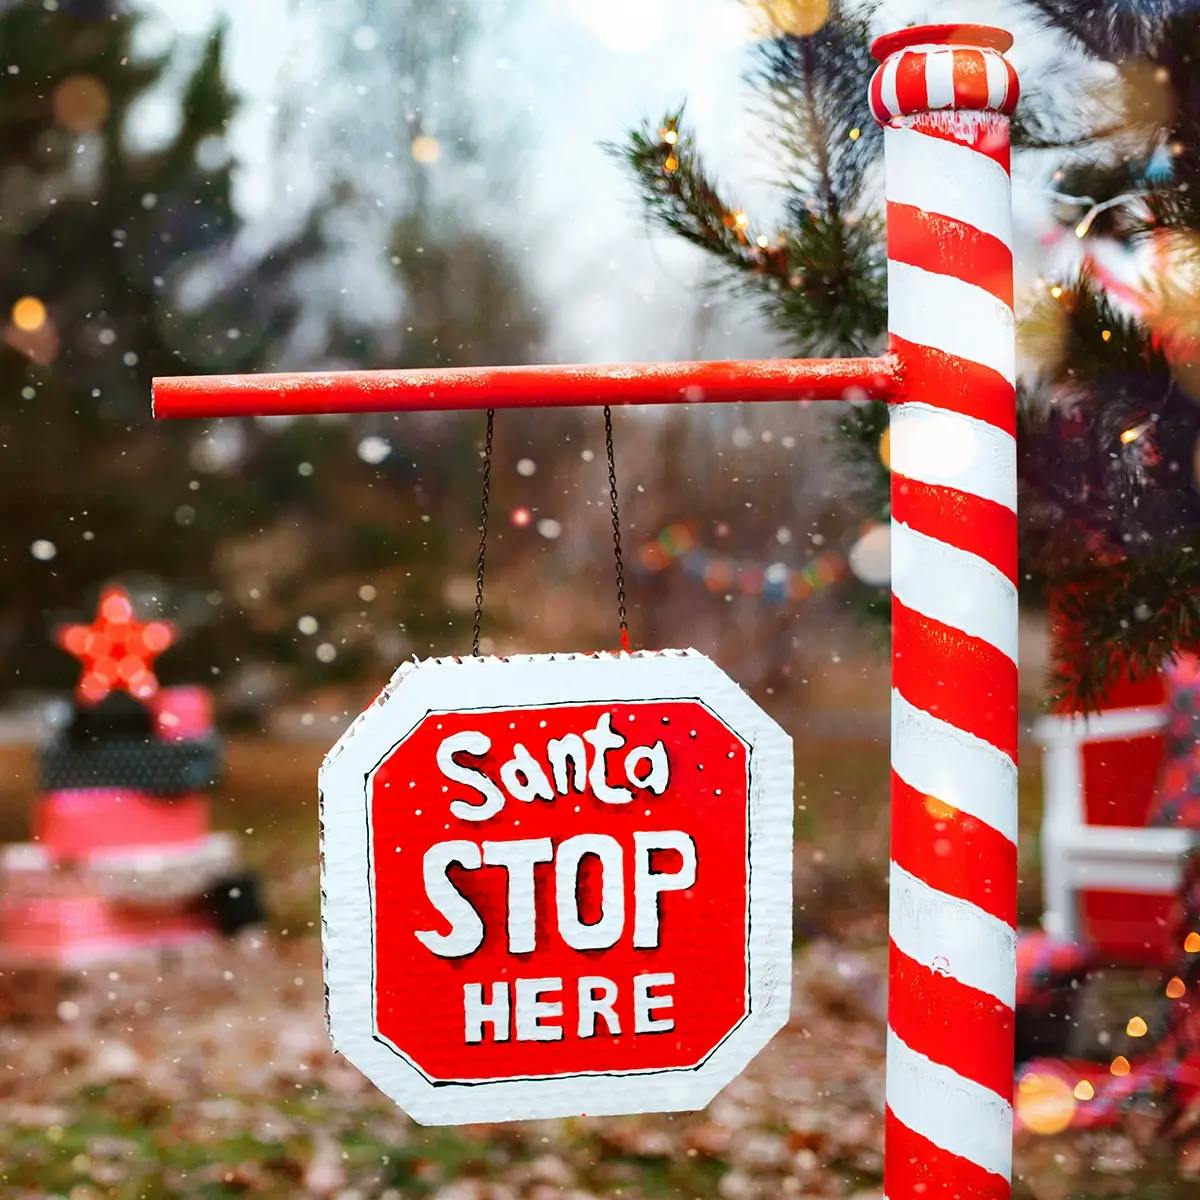 “Santa, Stop Here” sign on a pole in the front yard of a house with snow falling in the background.